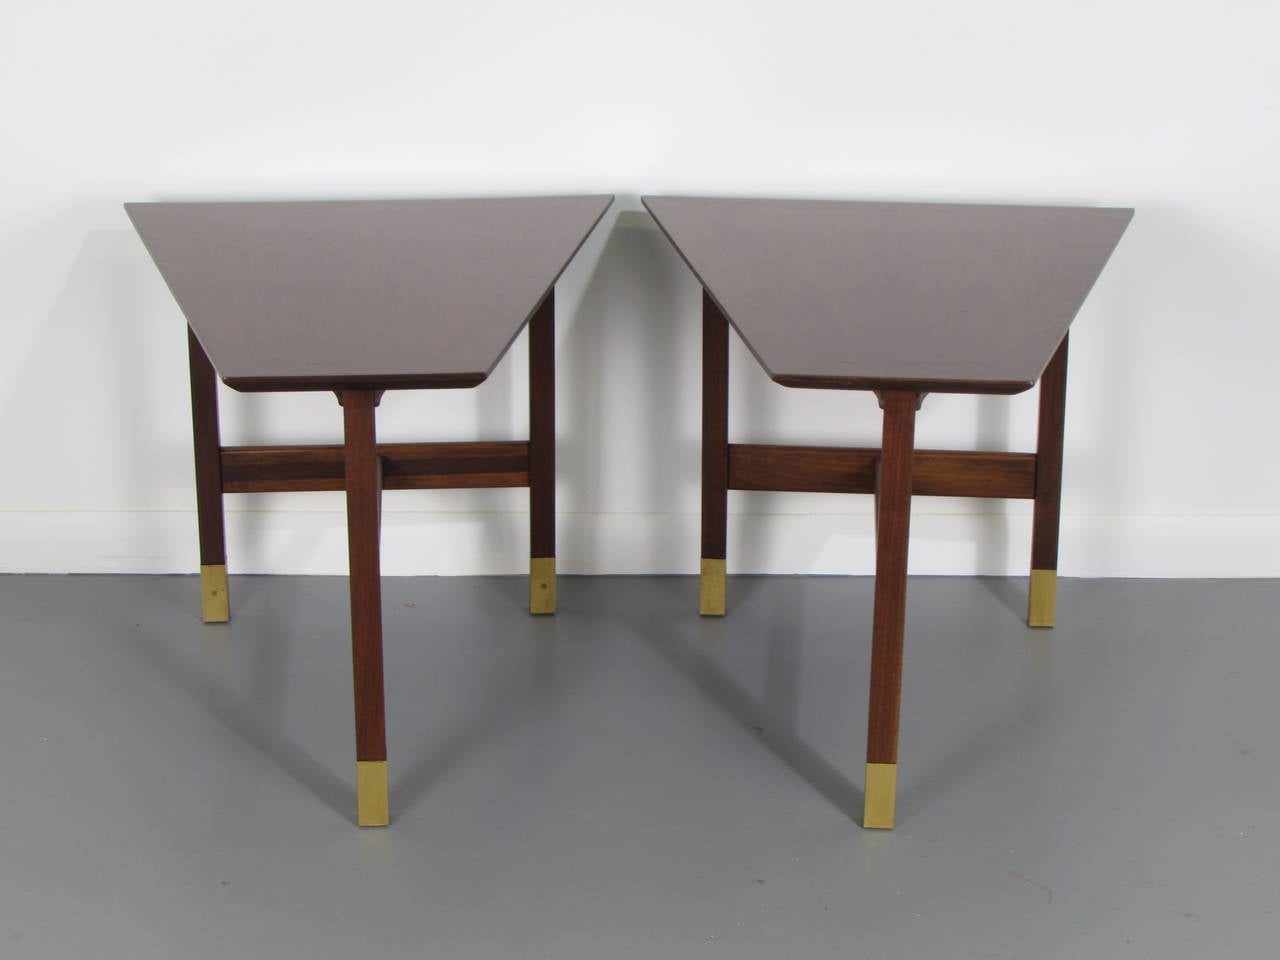 Handsome trapezoidal walnut and brass end tables by Harvey Probber, 1960s. These tables have been completely restored and are in excellent condition. 

See this item in our private NYC showroom! Refine Limited is located in the heart of Chelsea at